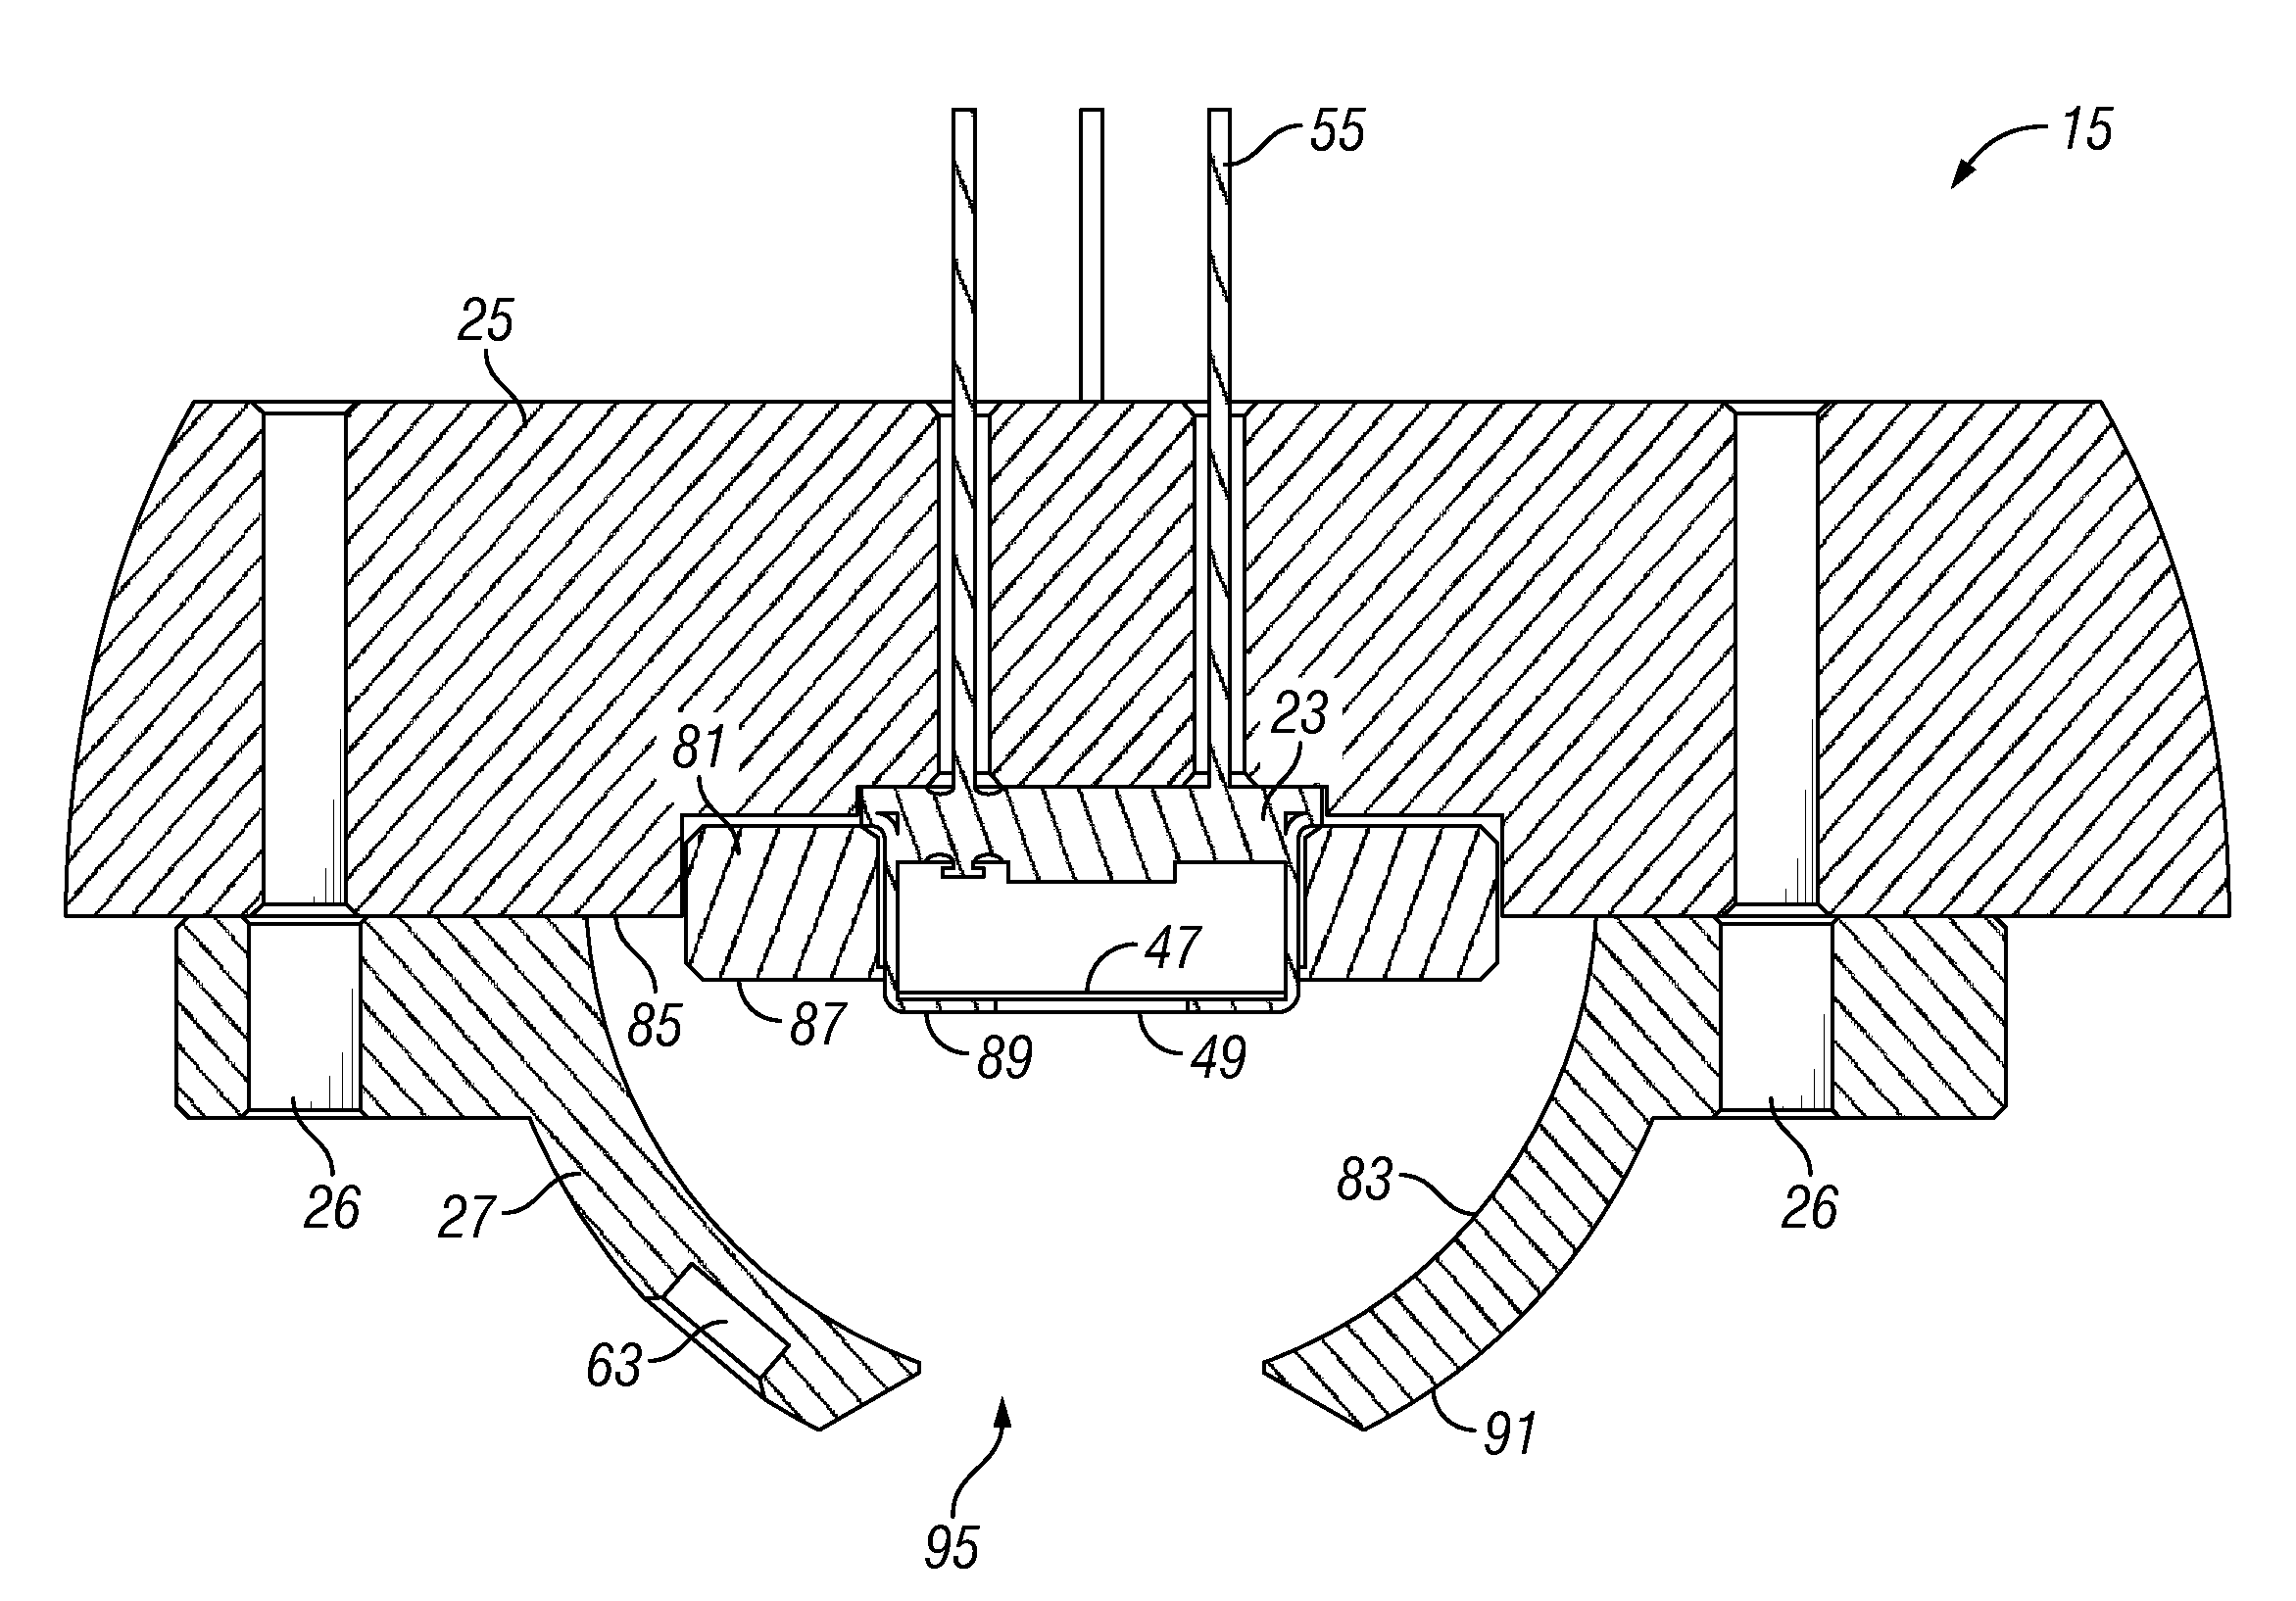 Apparatus and method for non-invasive measurement of a substance within a body